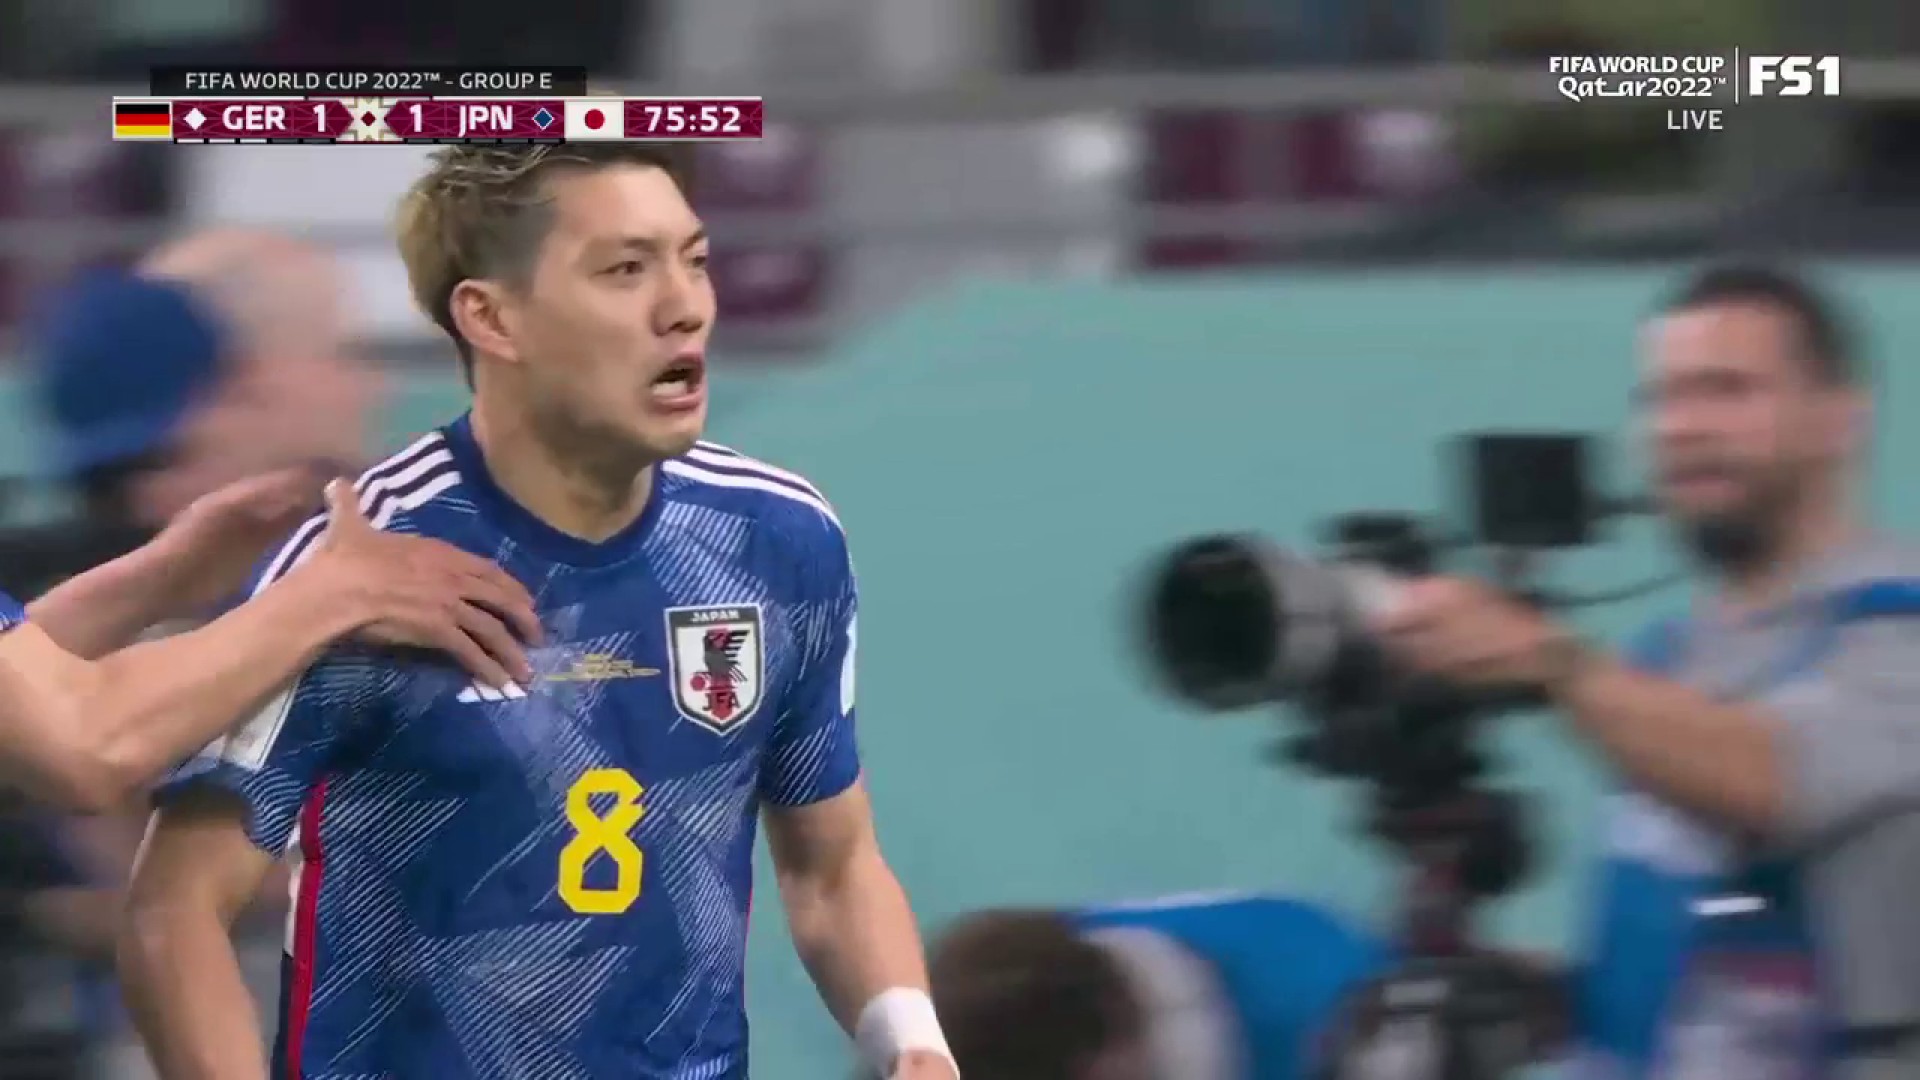 A closer look at Japan's equalizer by Ritsu Doan 🔥🇯🇵”